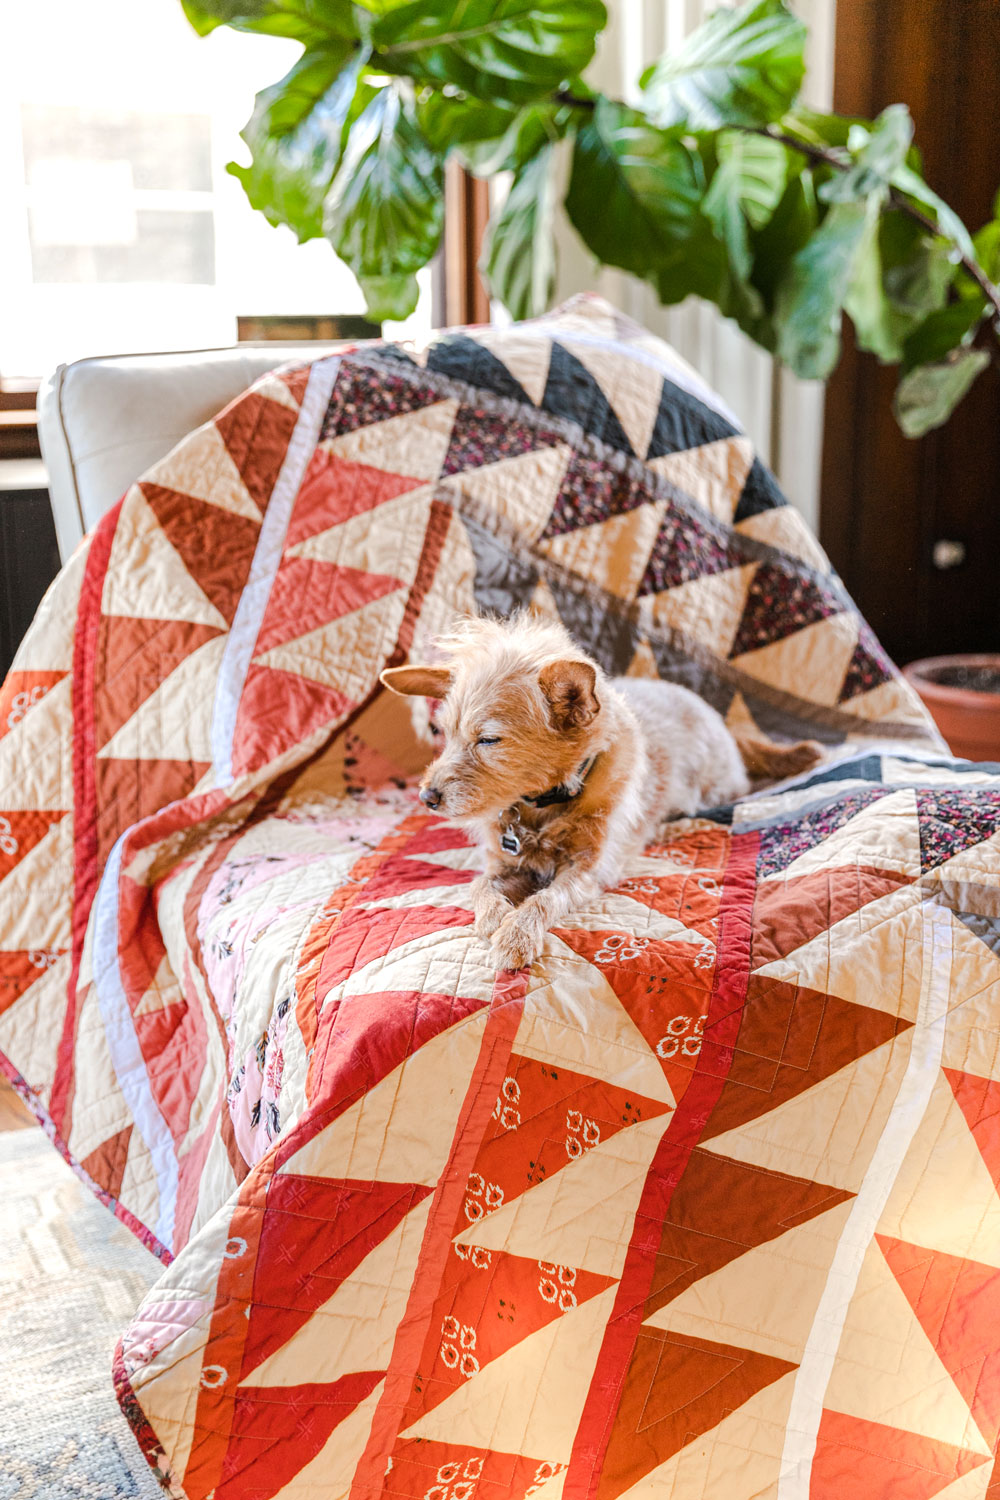 Join a fun sew along! It is easy to participate – all you need is the Gather quilt pattern so we make this quilt together! suzyquilts.com #quiltpattern #quiltdog